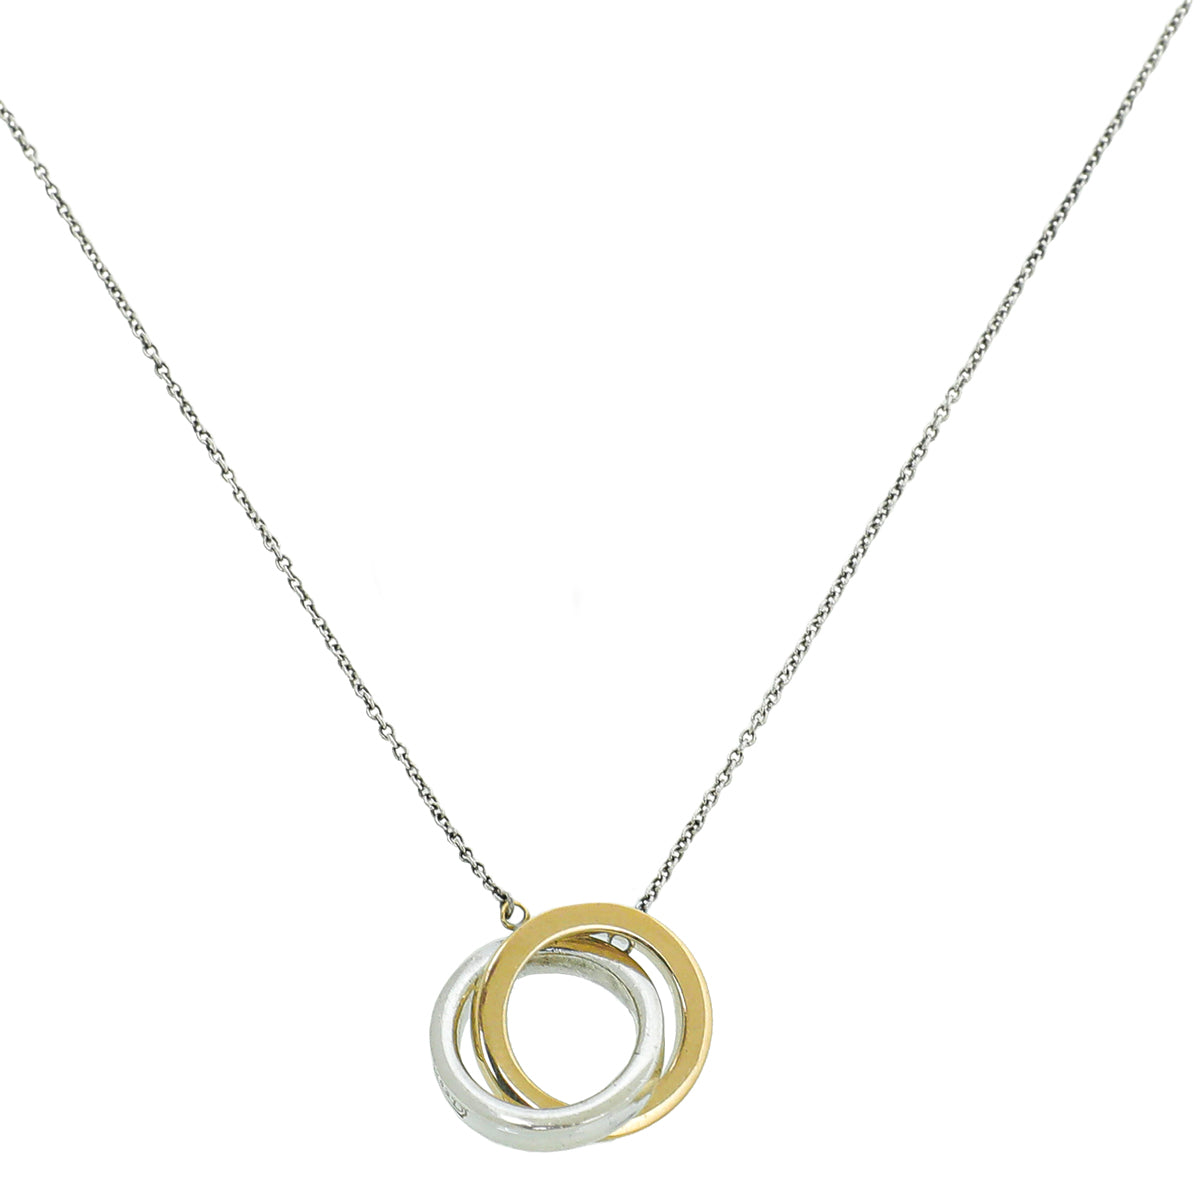 Tiffany & Co 18K Yellow Gold Sterling Silver Interlocking Circles Necklace